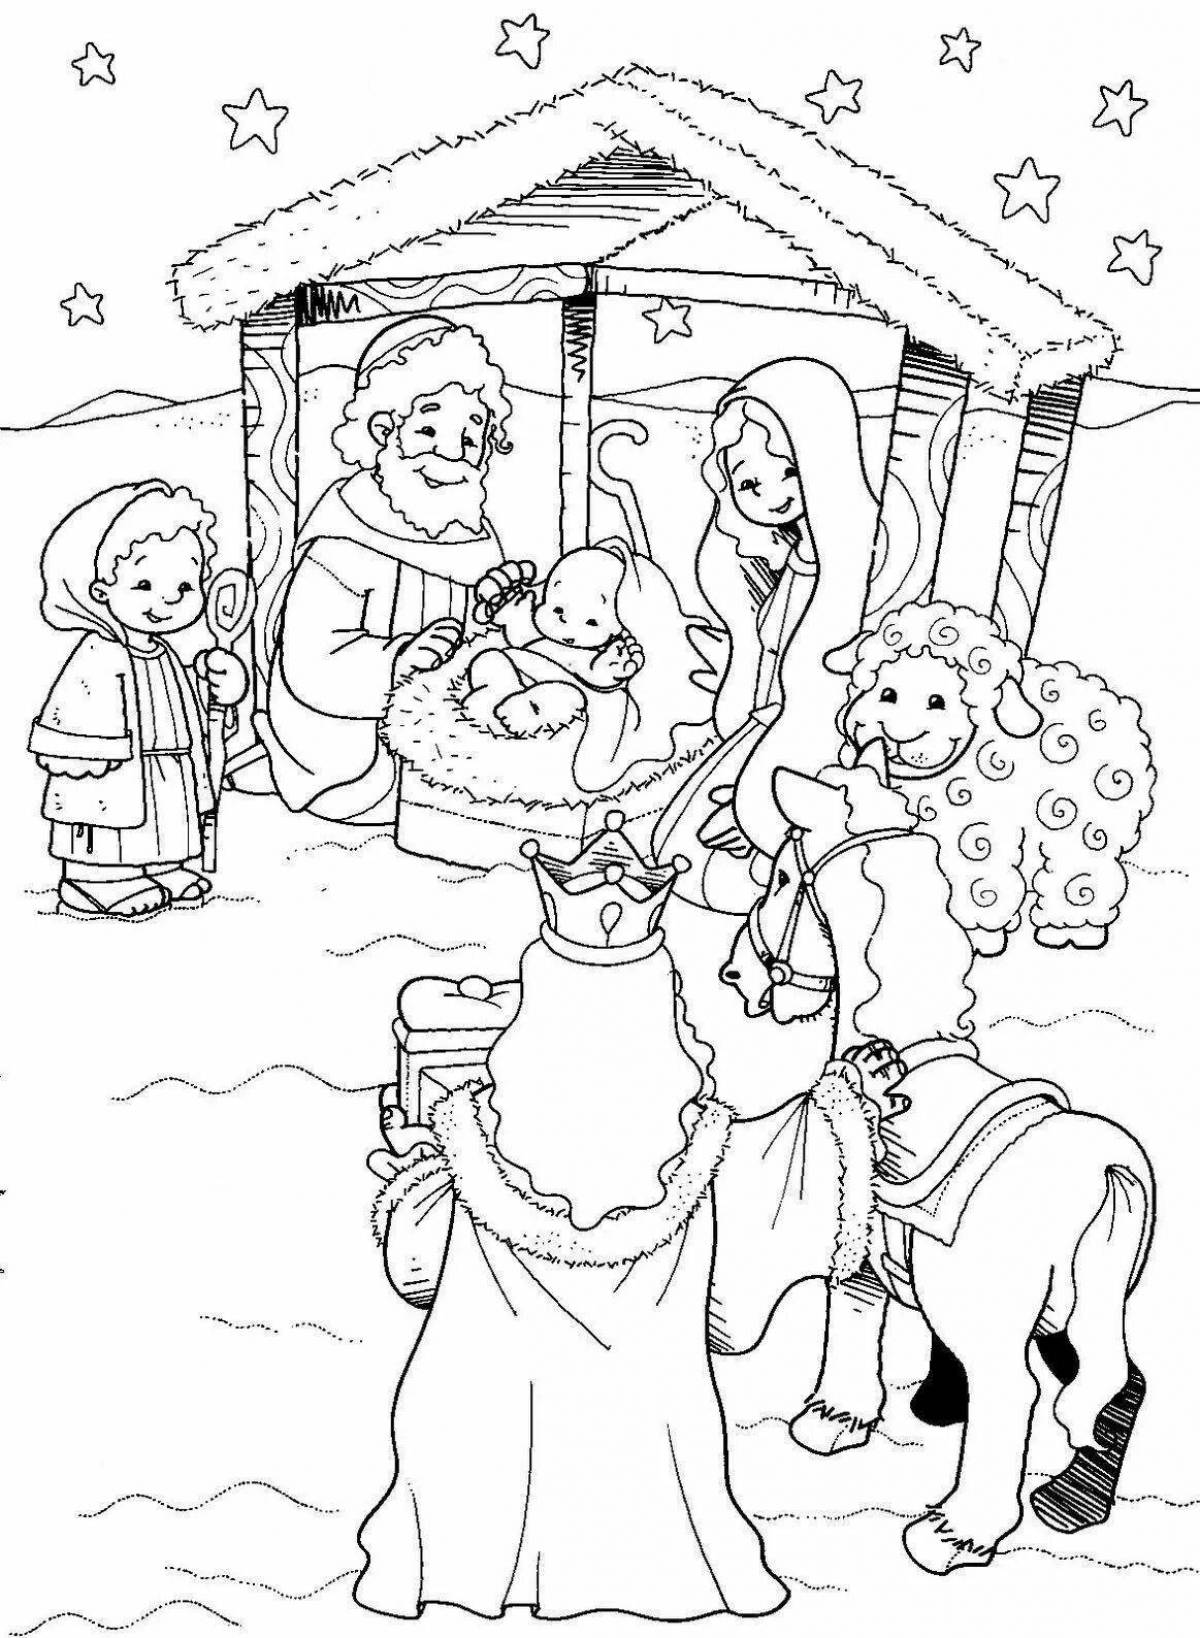 Magic Christmas coloring book for kids 5-6 years old